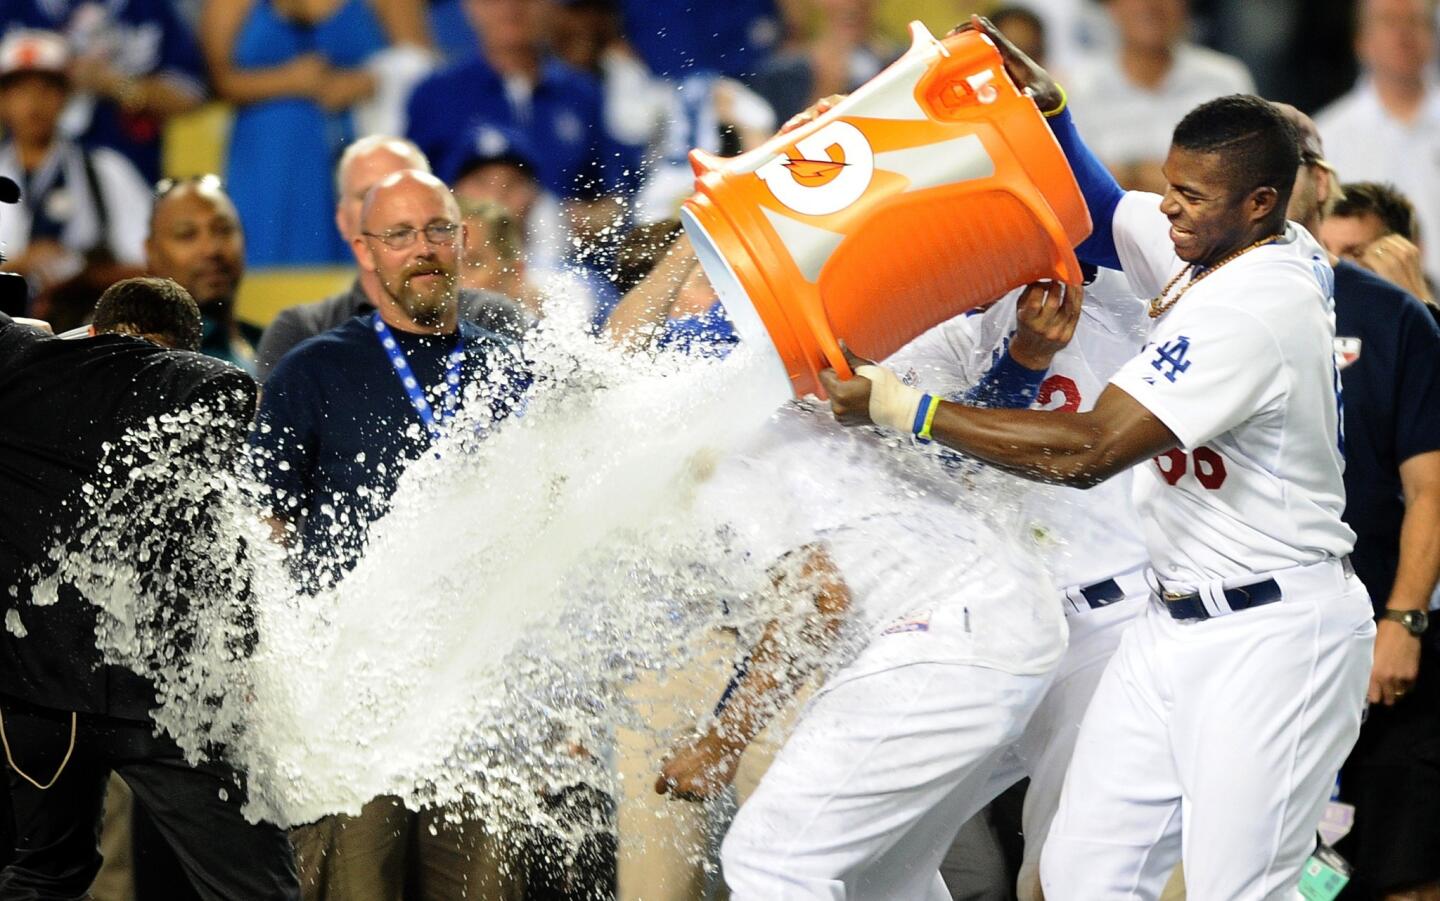 Dodgers right fielder Matt Kemp is doused with water by center fielder Yasiel Puig after the team's 3-2 victory over the Cardinals in Game 2 of the National League division series on Saturday night at Dodger Stadium.